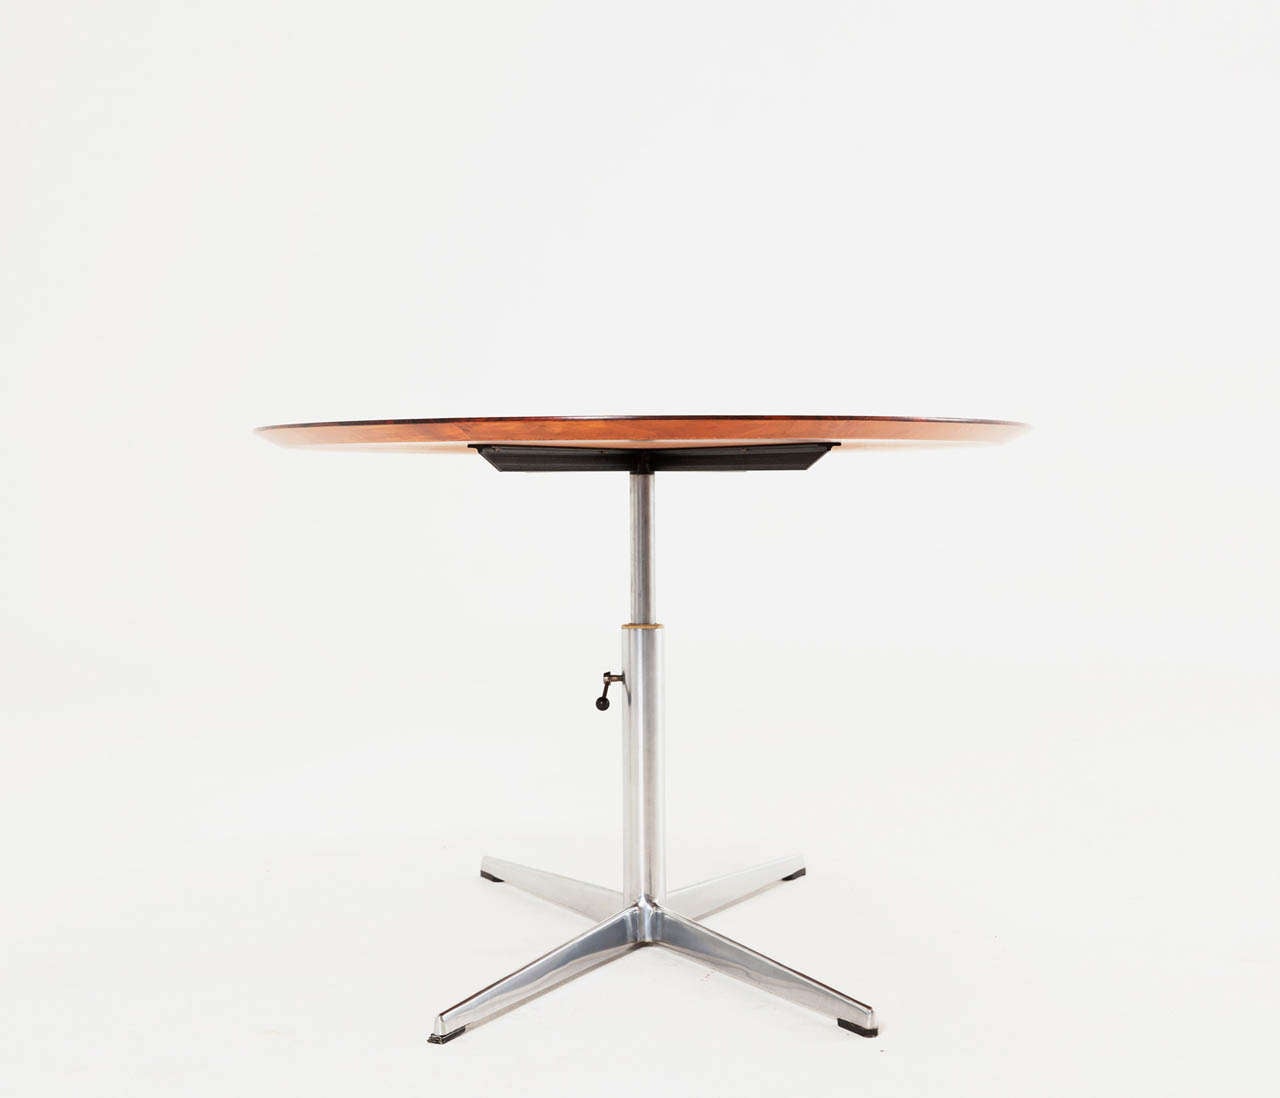 Danish Oval Mahogany Table with Height Adjustable Pedestal Base